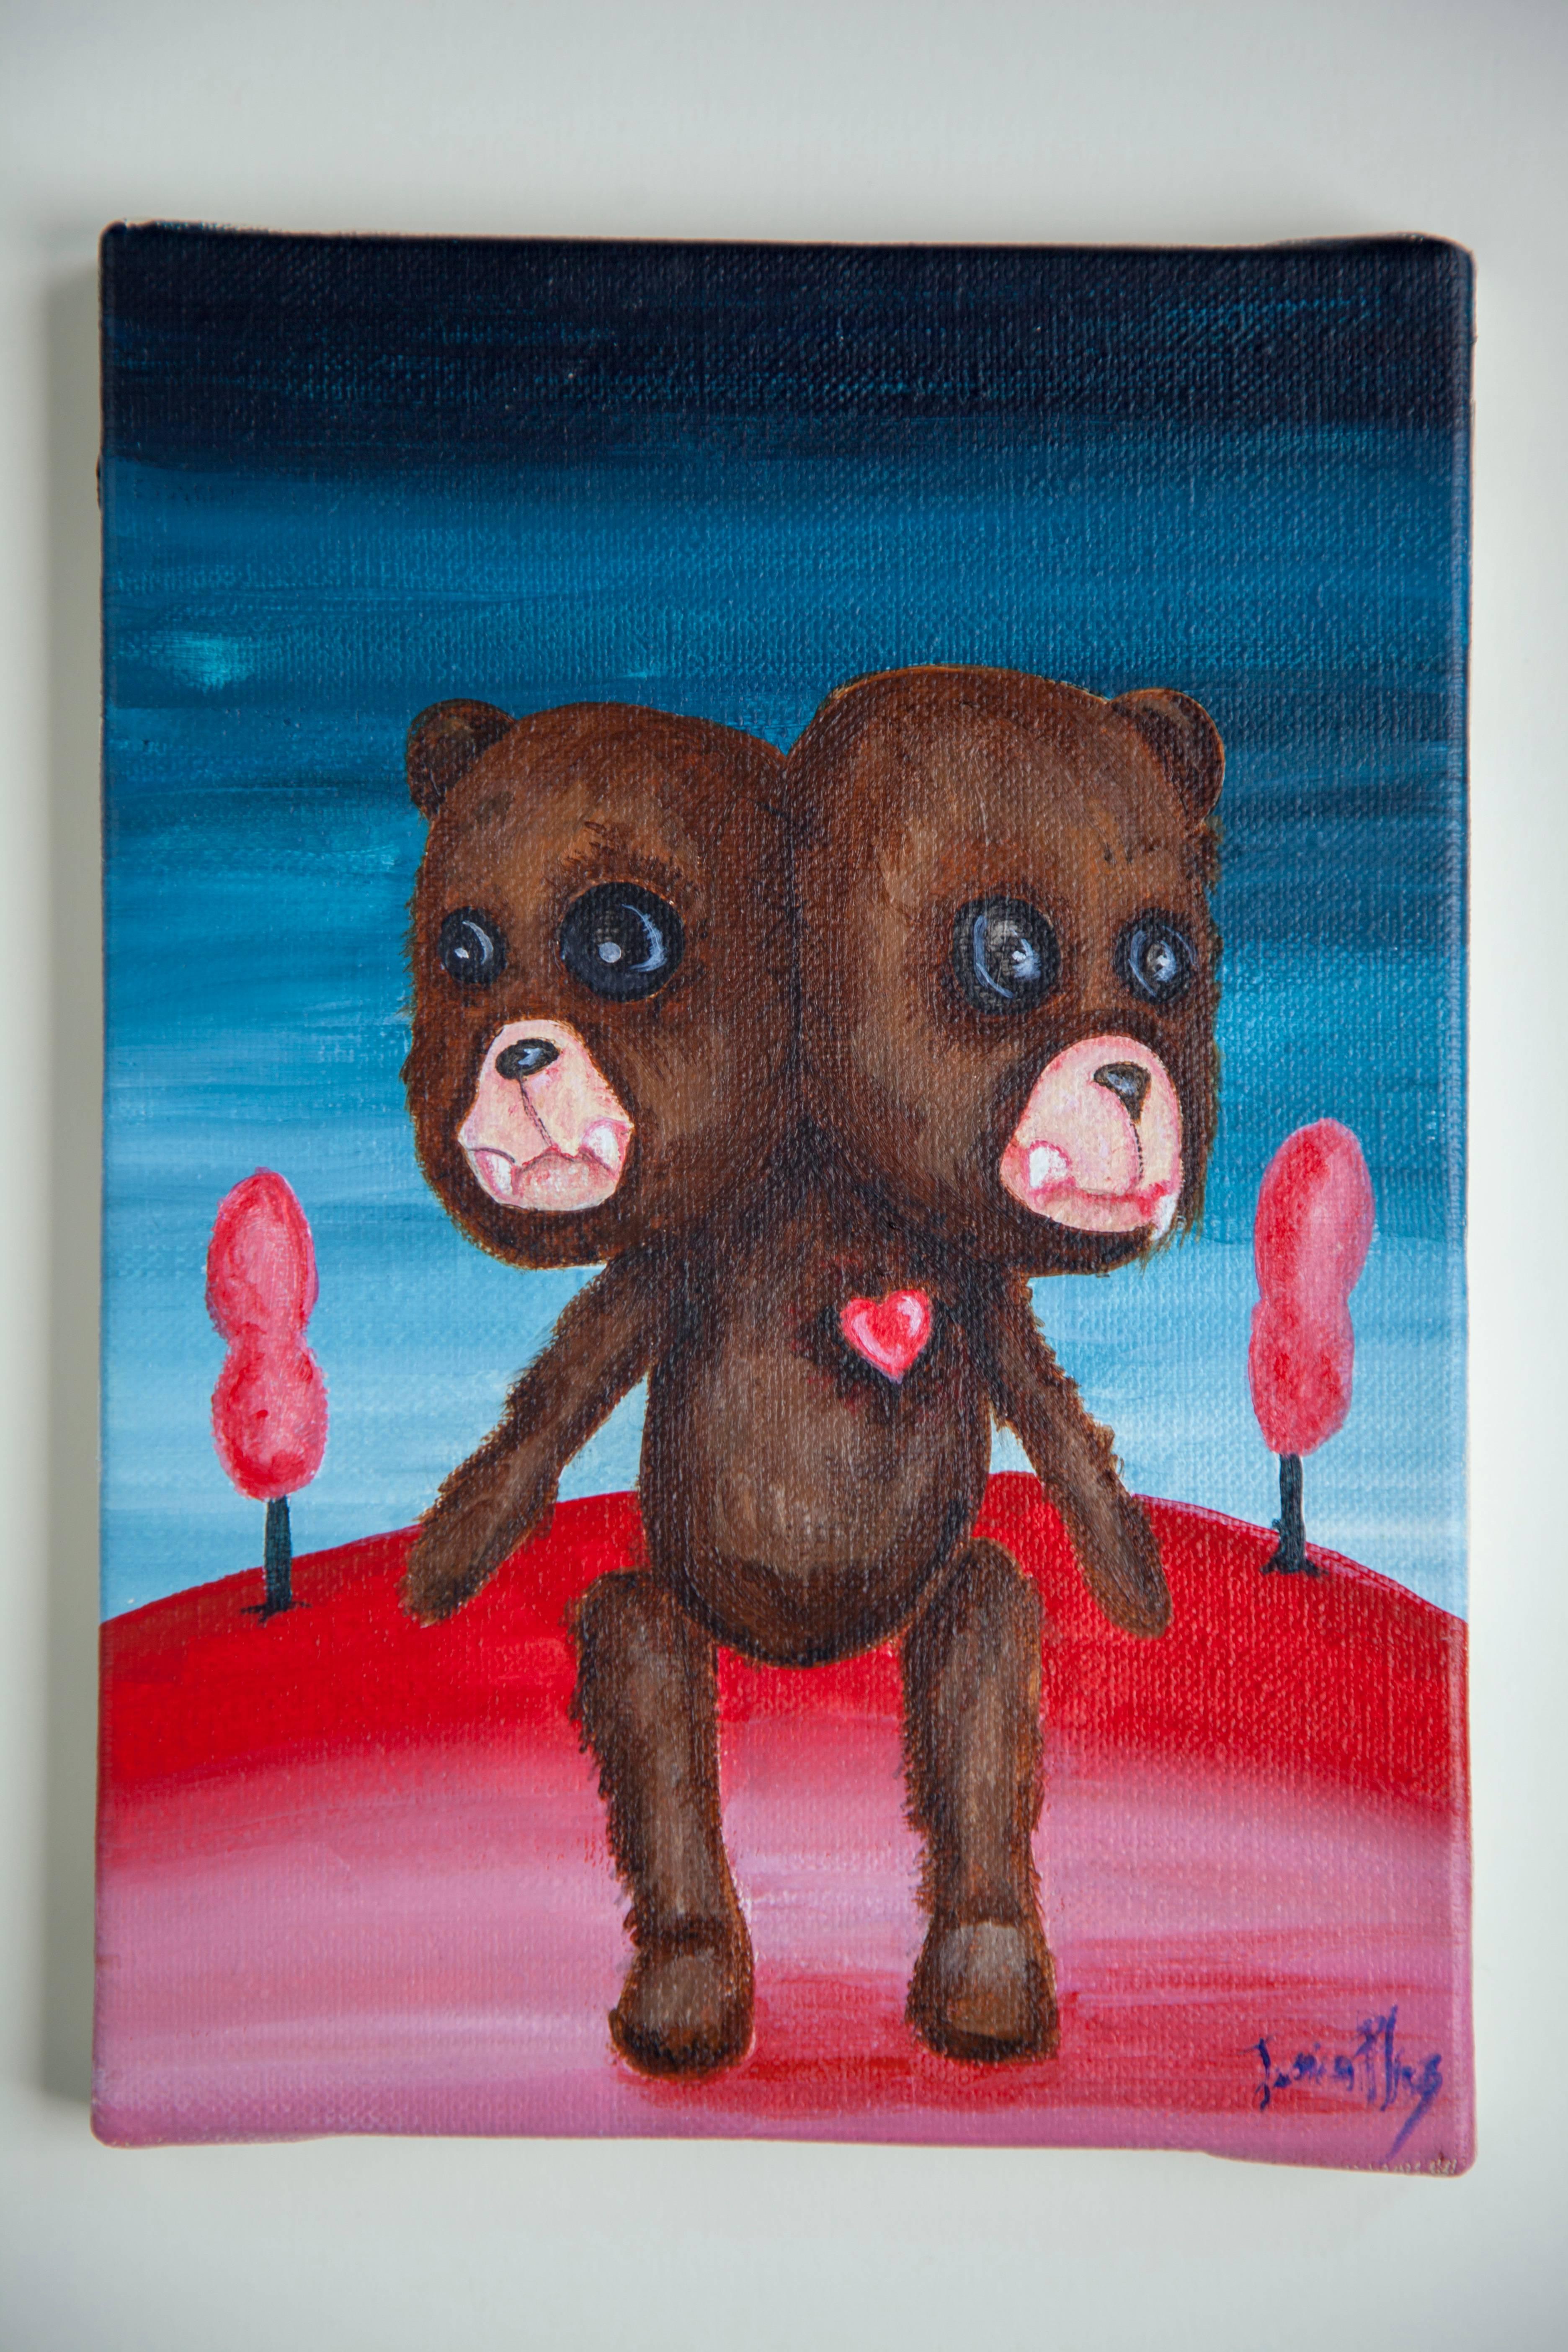 Two heads bear - Painting by Jessica Pliez